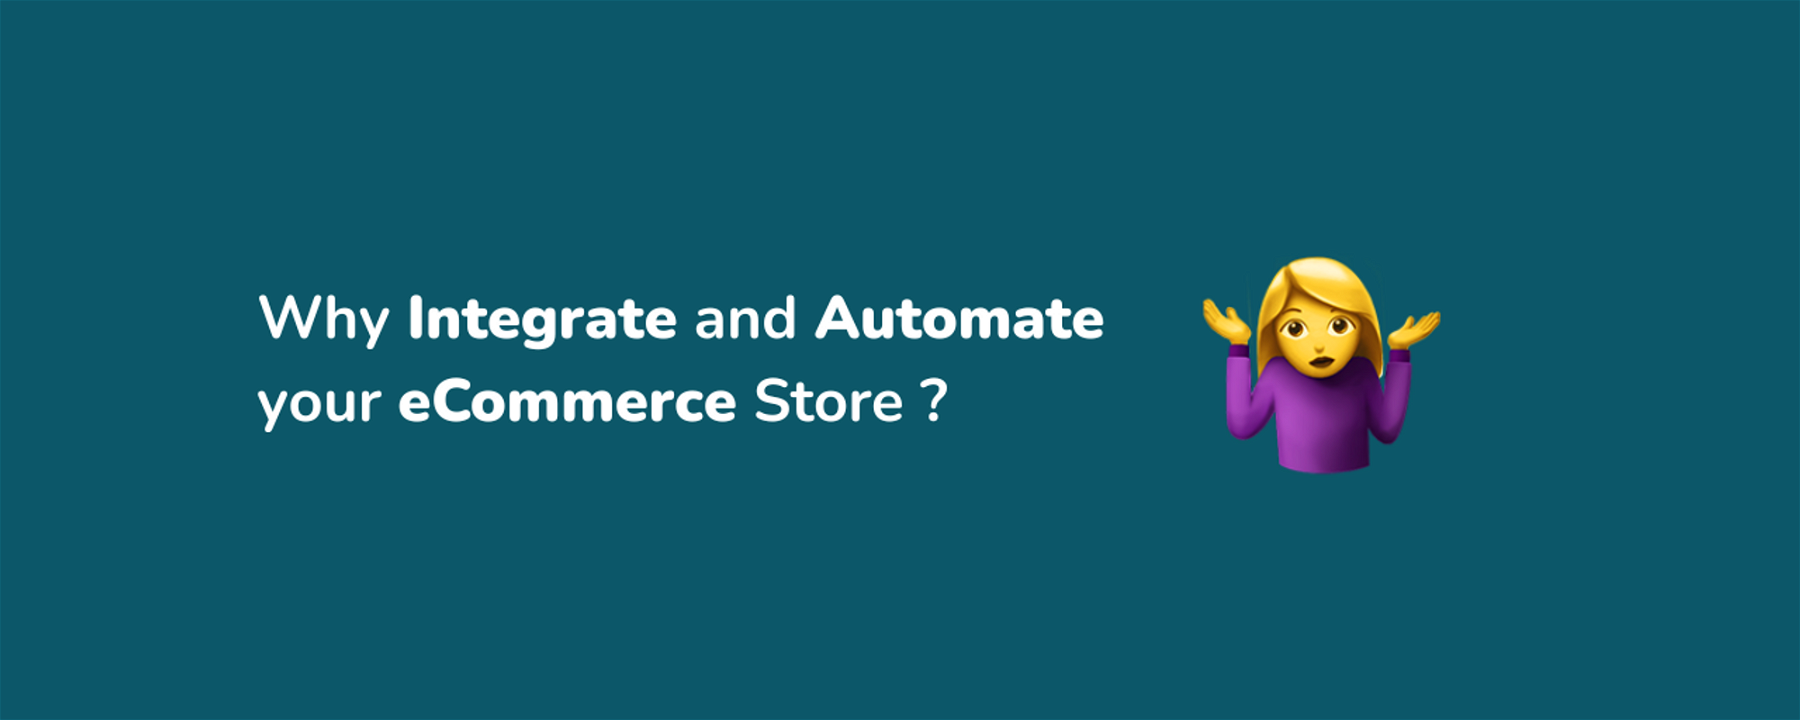 Why you should Integrate and Automate your eCommerce Store